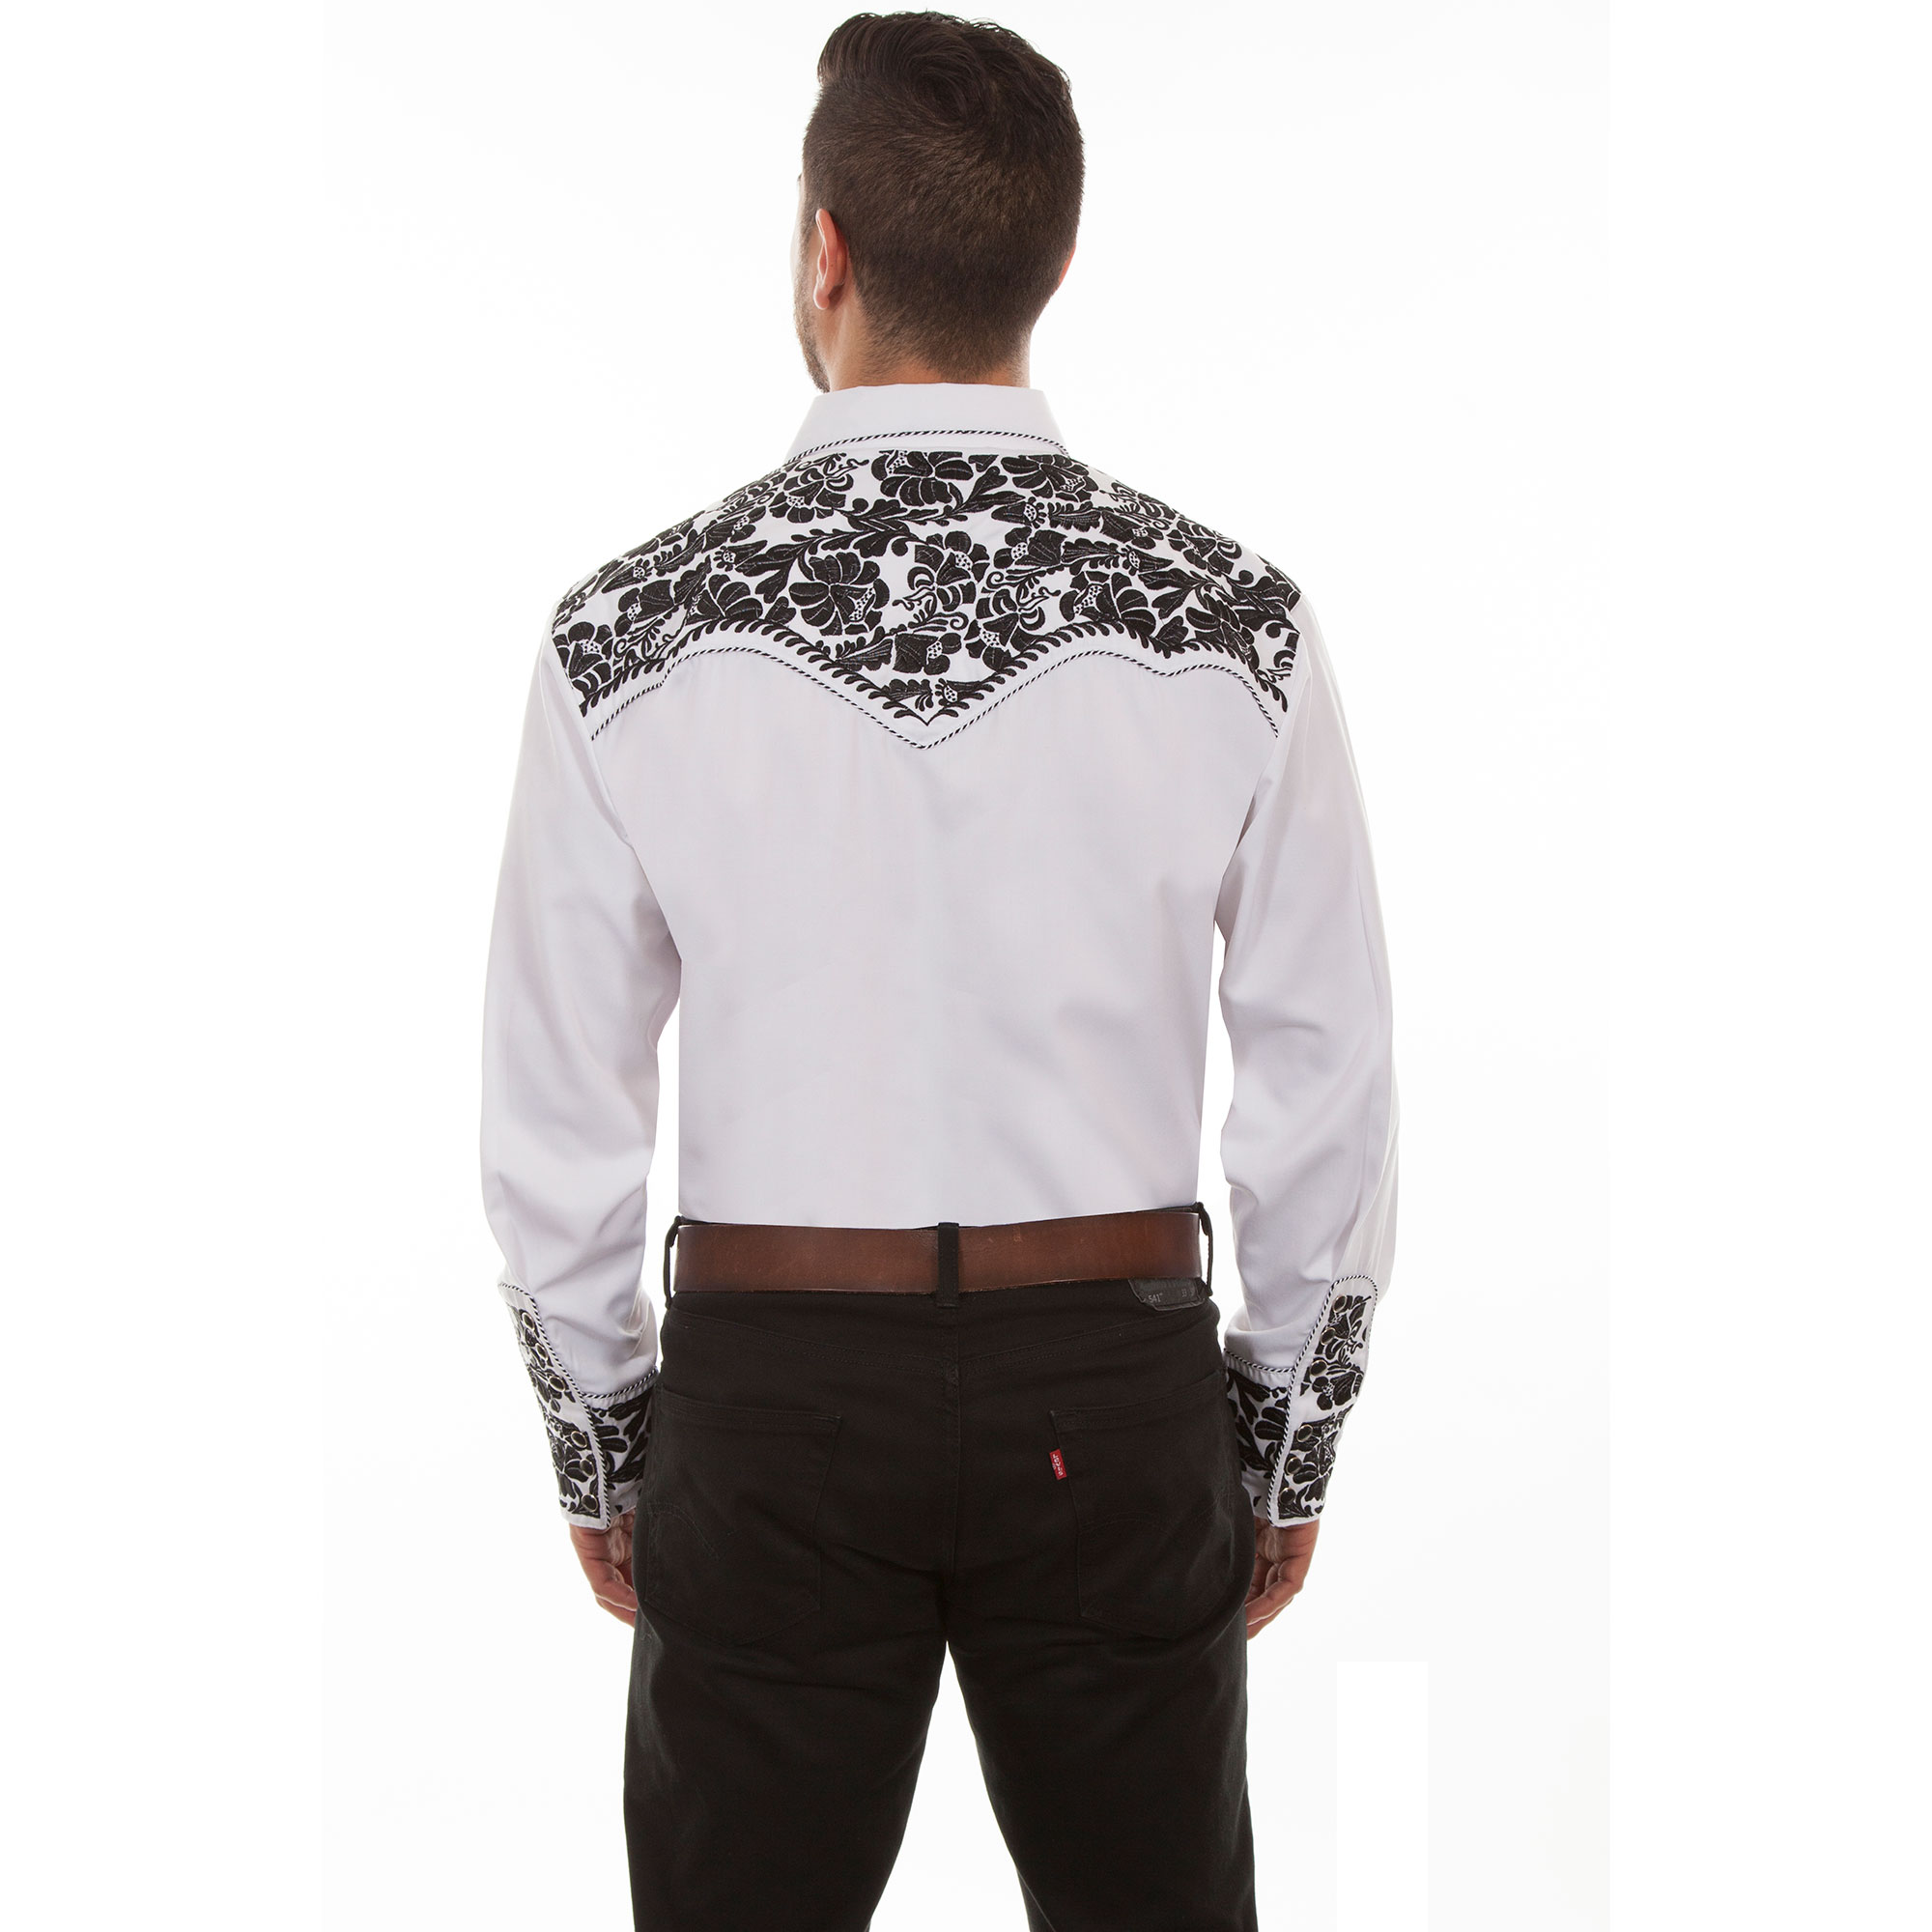 Pungo Ridge - Scully Men's Shirt w/Floral Tooled Embroidery - White ...